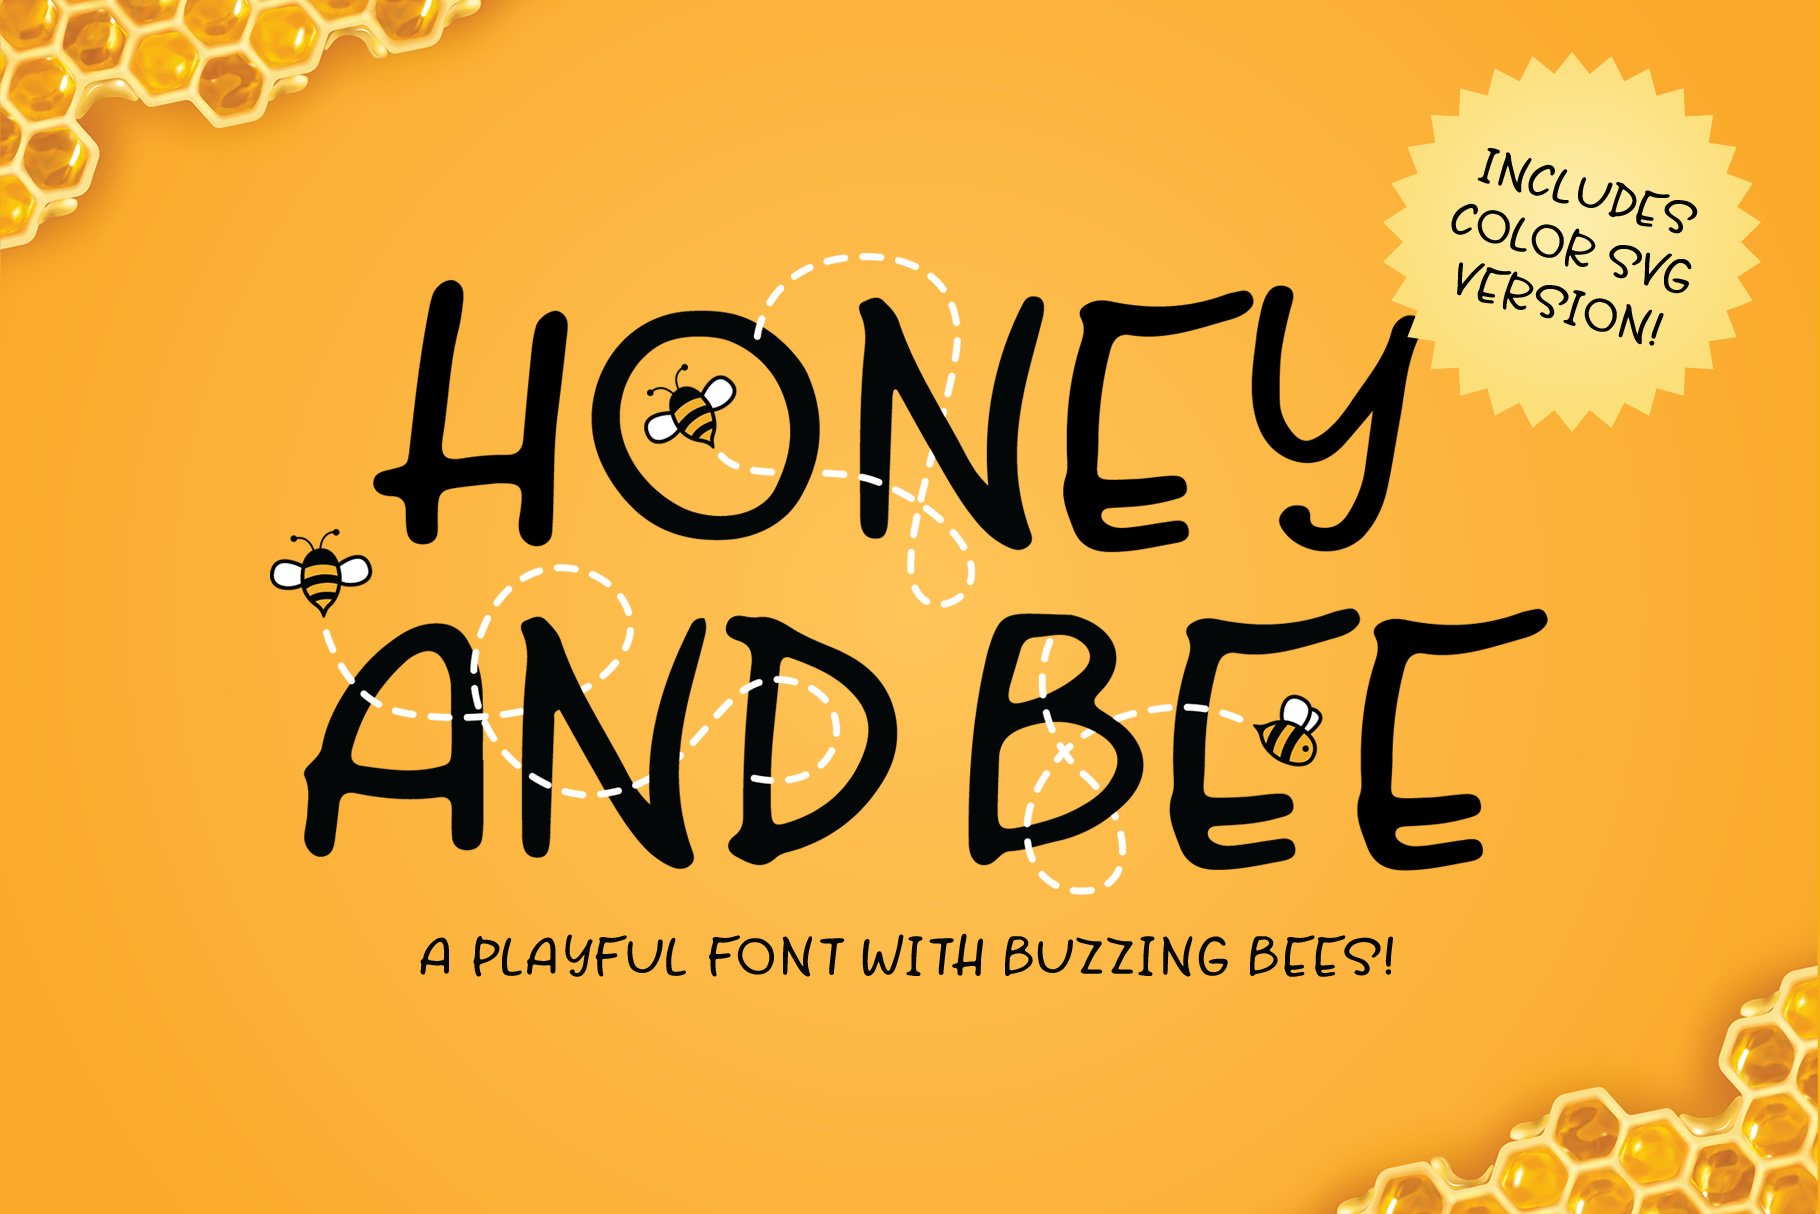 Honey and Bee Font cover image.